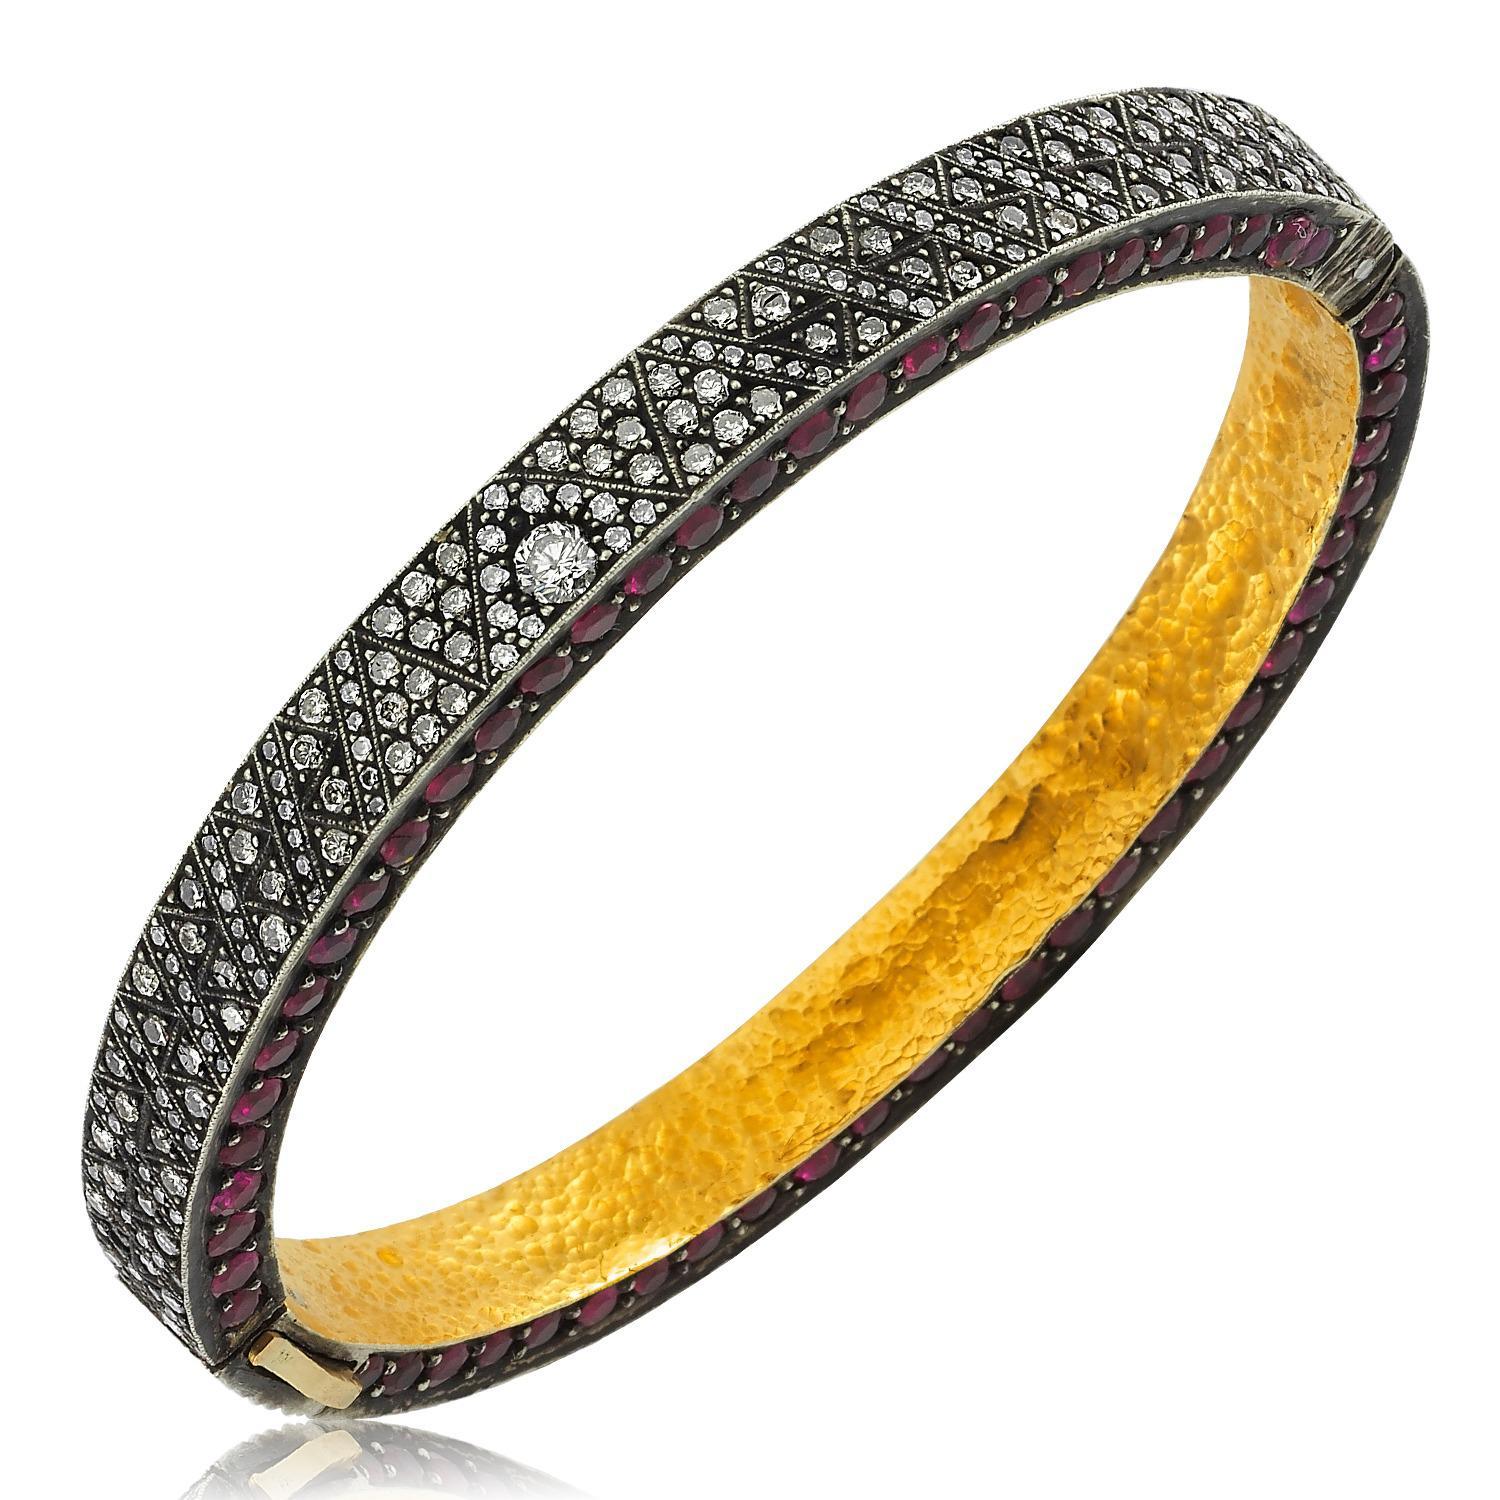 This elegant and modern bangle by Emre Osmanlar Gothice Collection, it features 24 K gold and fine silver bracelet with 8 ct rubies, 4.5 ct champagne diamonds and 25 ct white diamonds. This piece is entirely made in an artisanal way.

Gothice is a